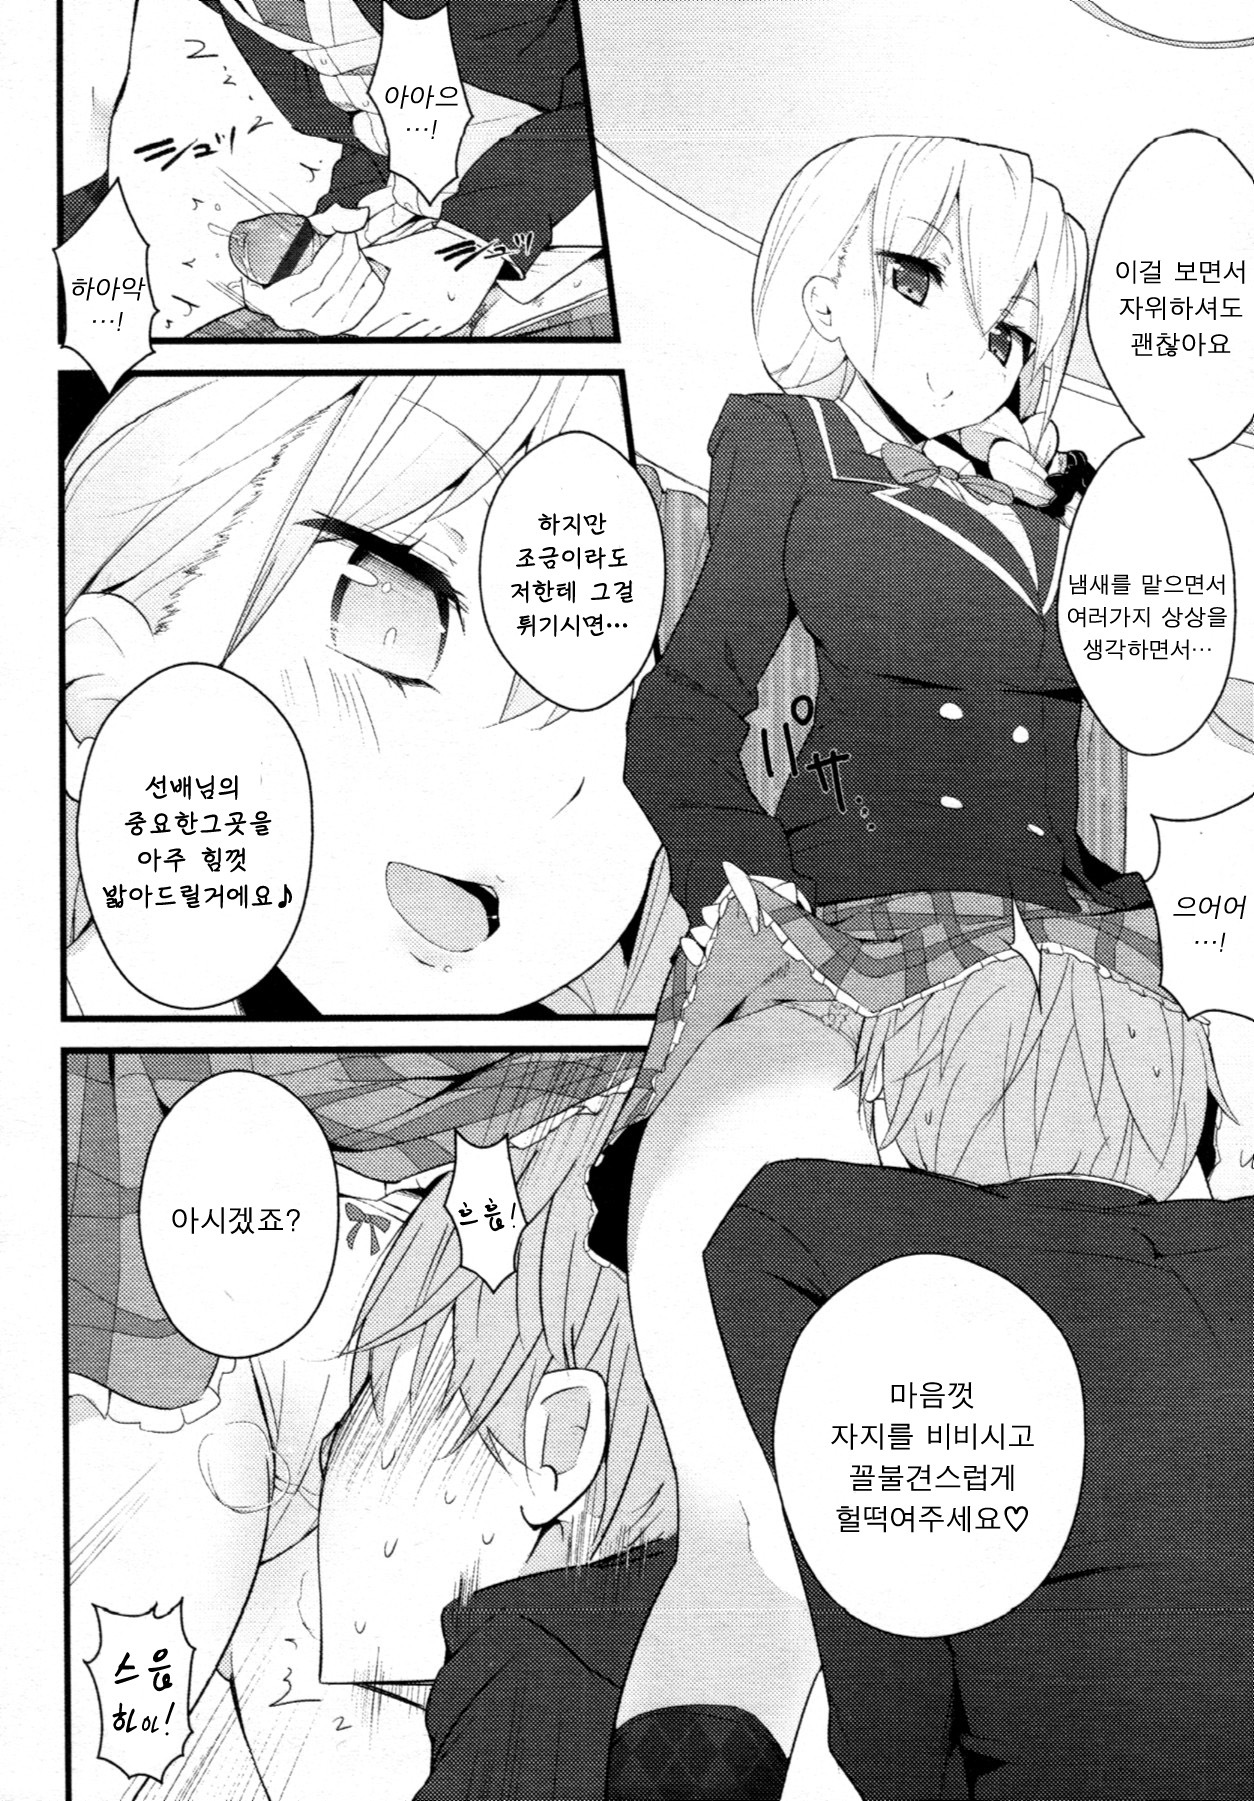 [Mame] Sex a Heel (COMIC Tenma 2011-07) [Korean] [Lily] page 6 full